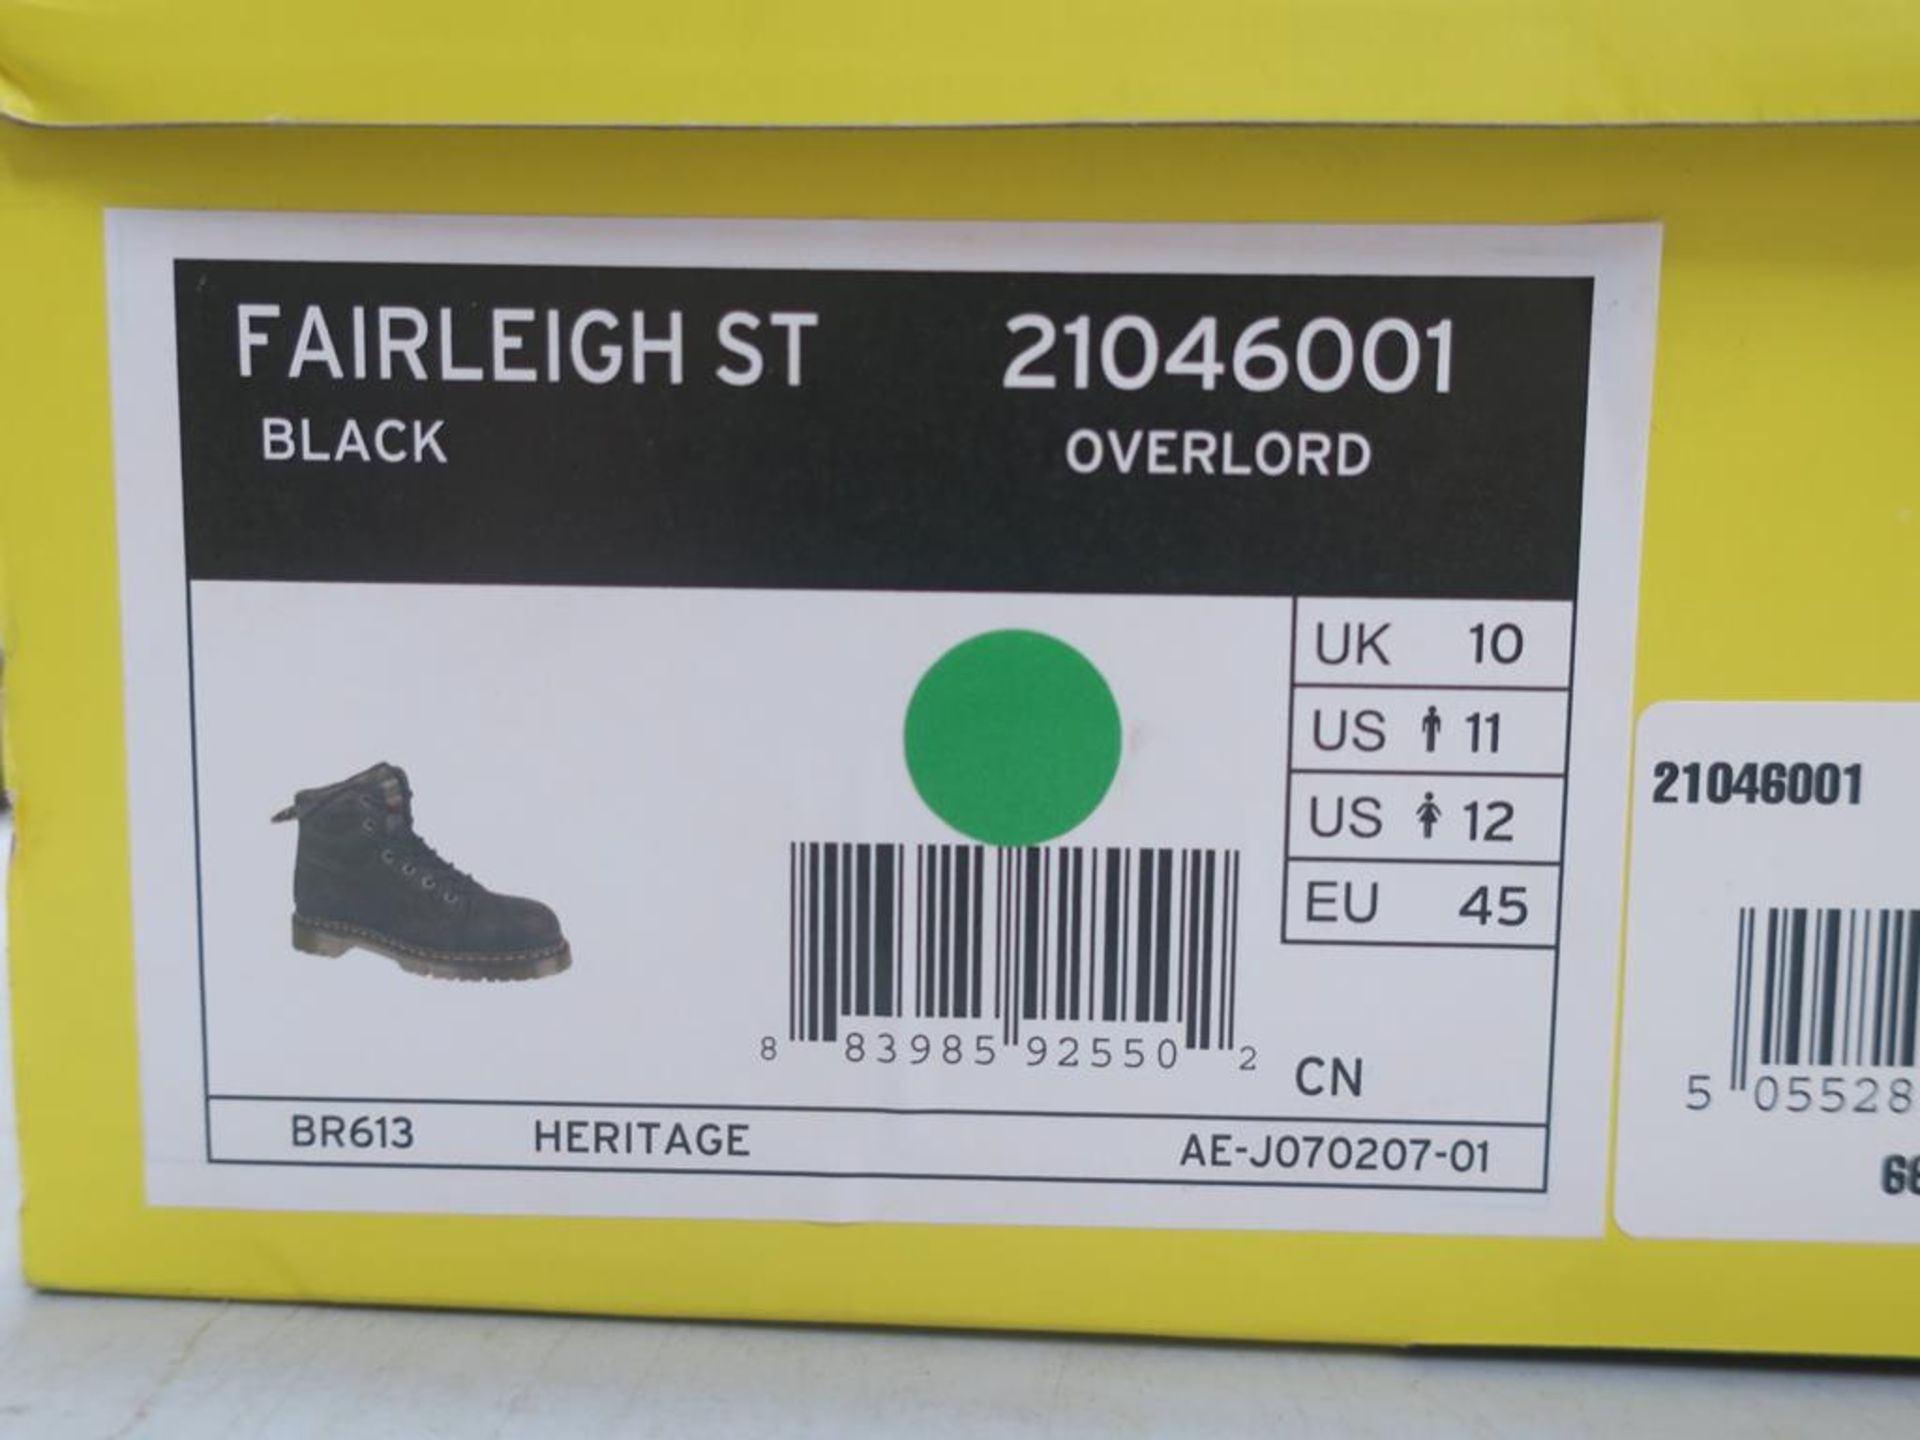 * A pair of New/Boxed Dr Martens Boots, Fairleigh ST, Overlord, 21046001, in black, UK size 10 - Image 3 of 3